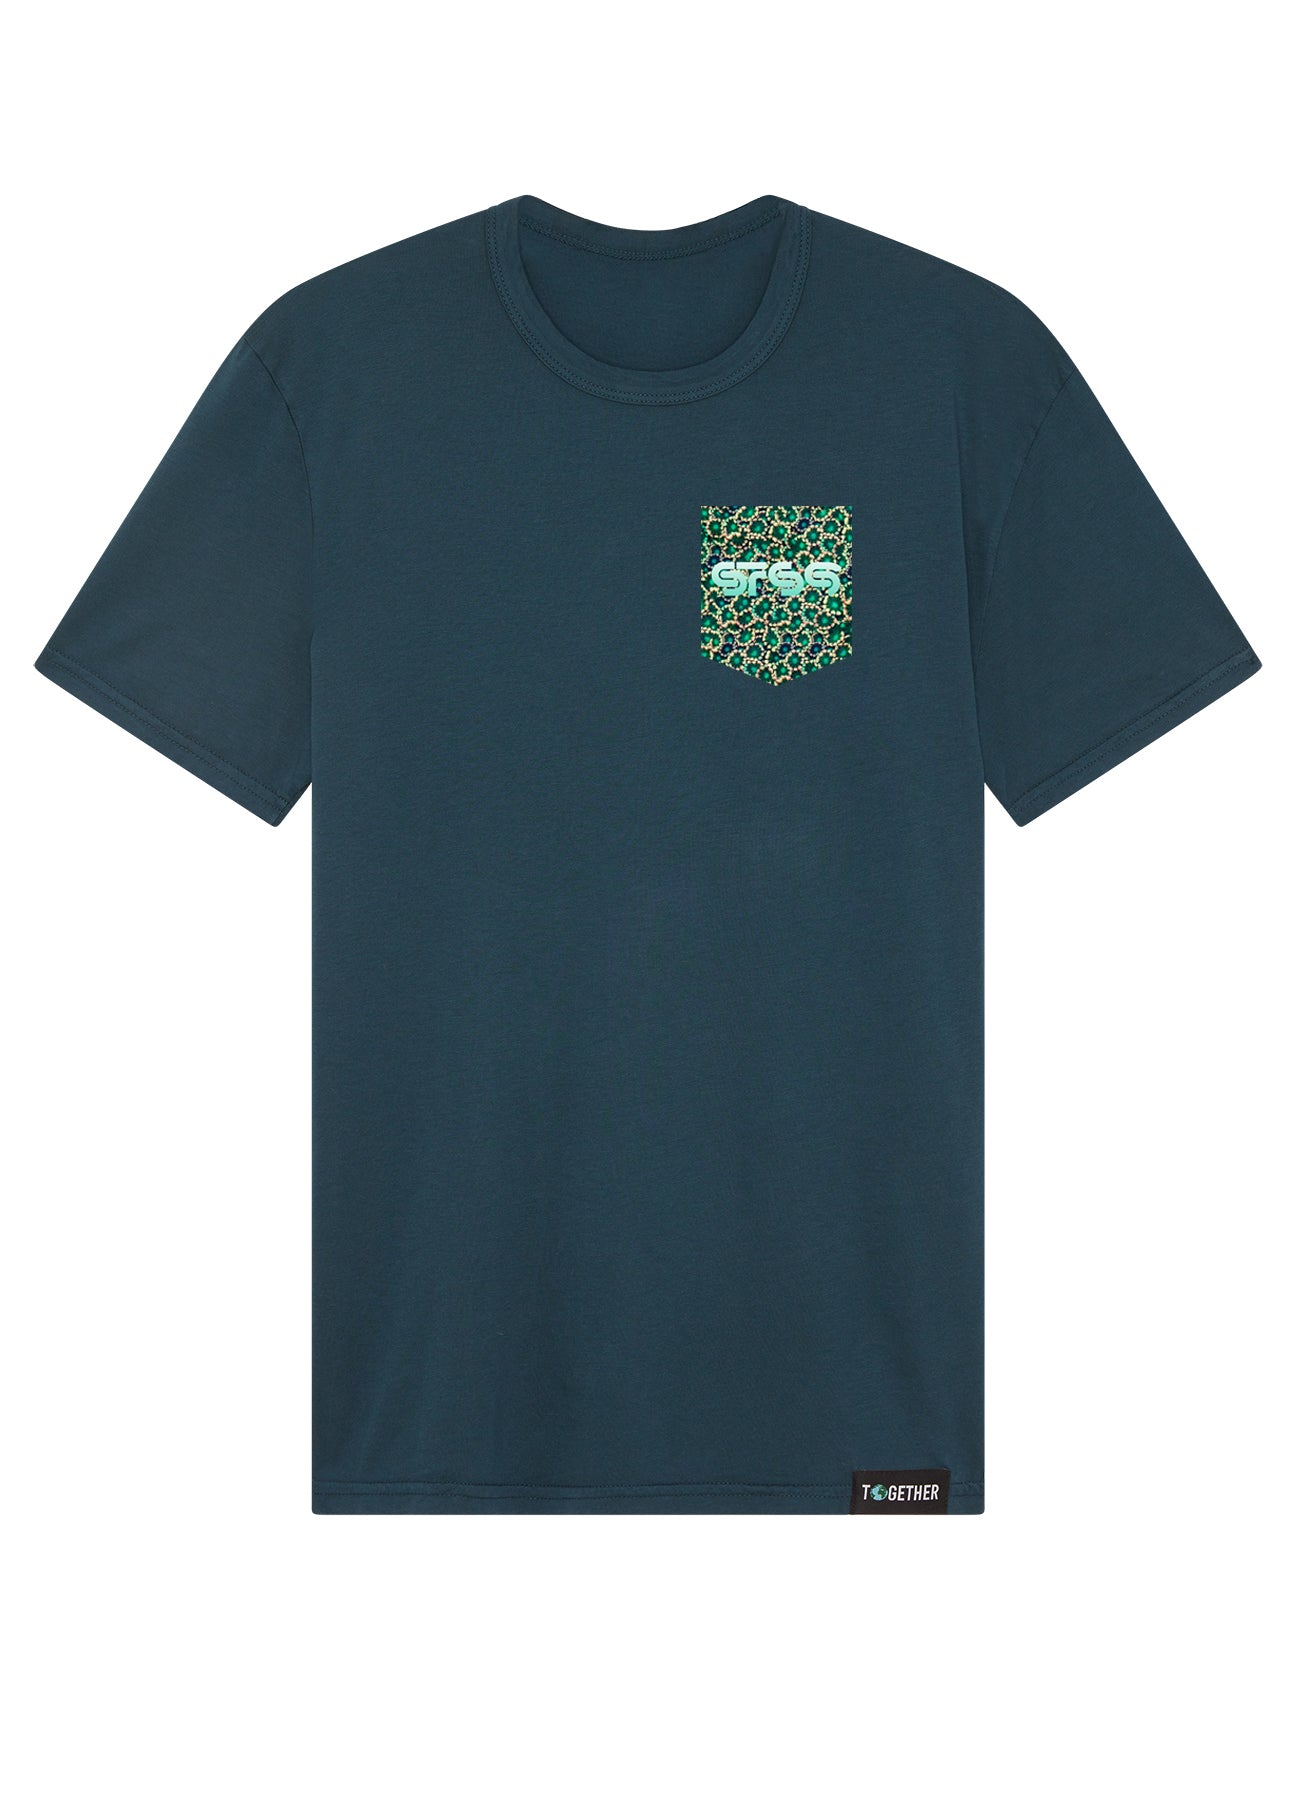 STS9 Polyp Coral Pocket Tee